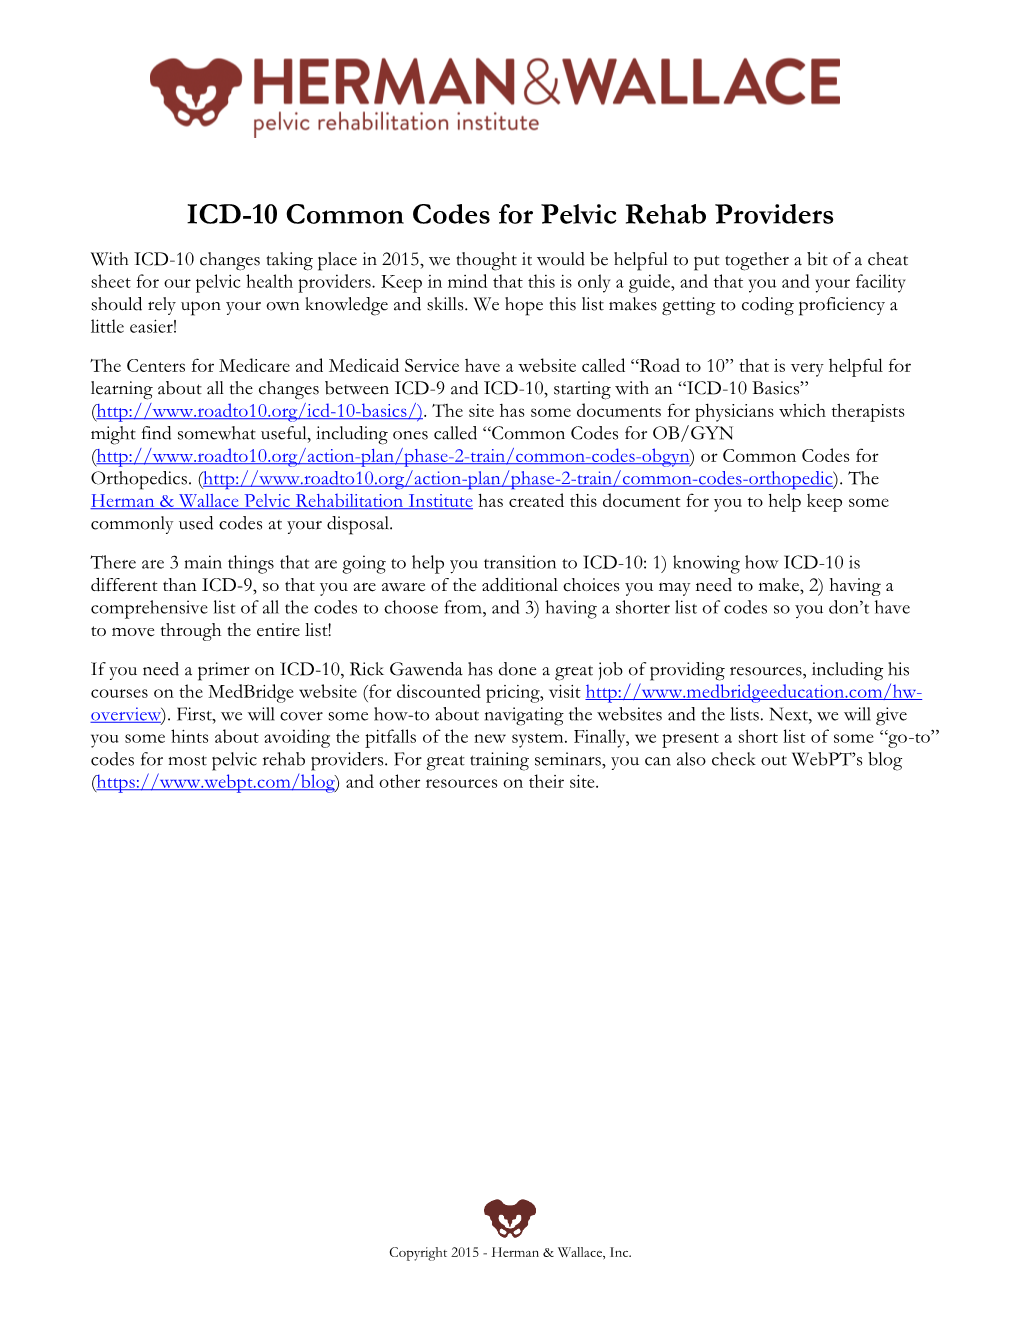 ICD-10 Common Codes for Pelvic Rehab Providers